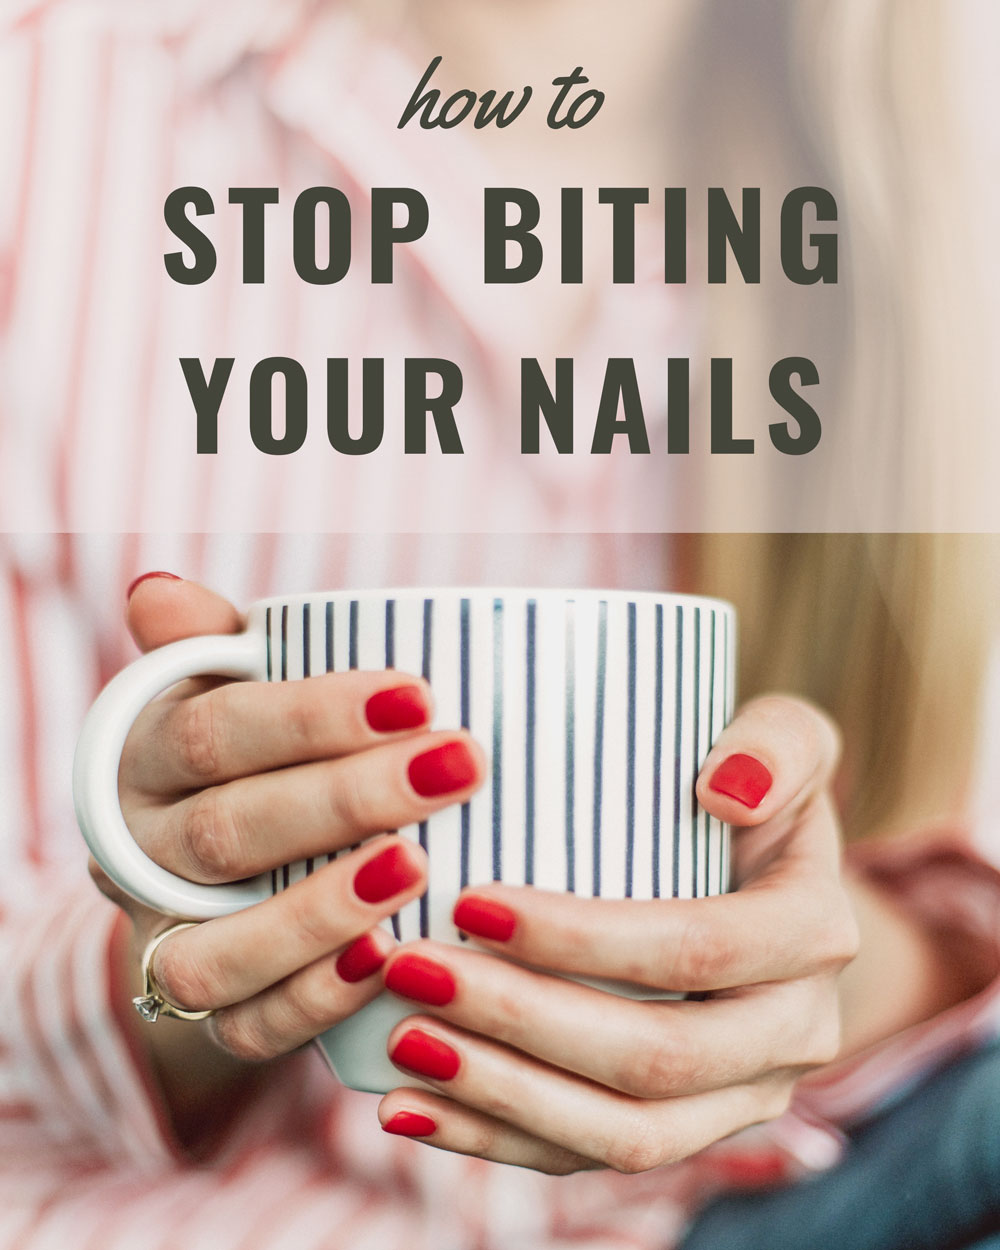 How To Finally Stop Biting Your Nails And My 1 Strengthening Tip